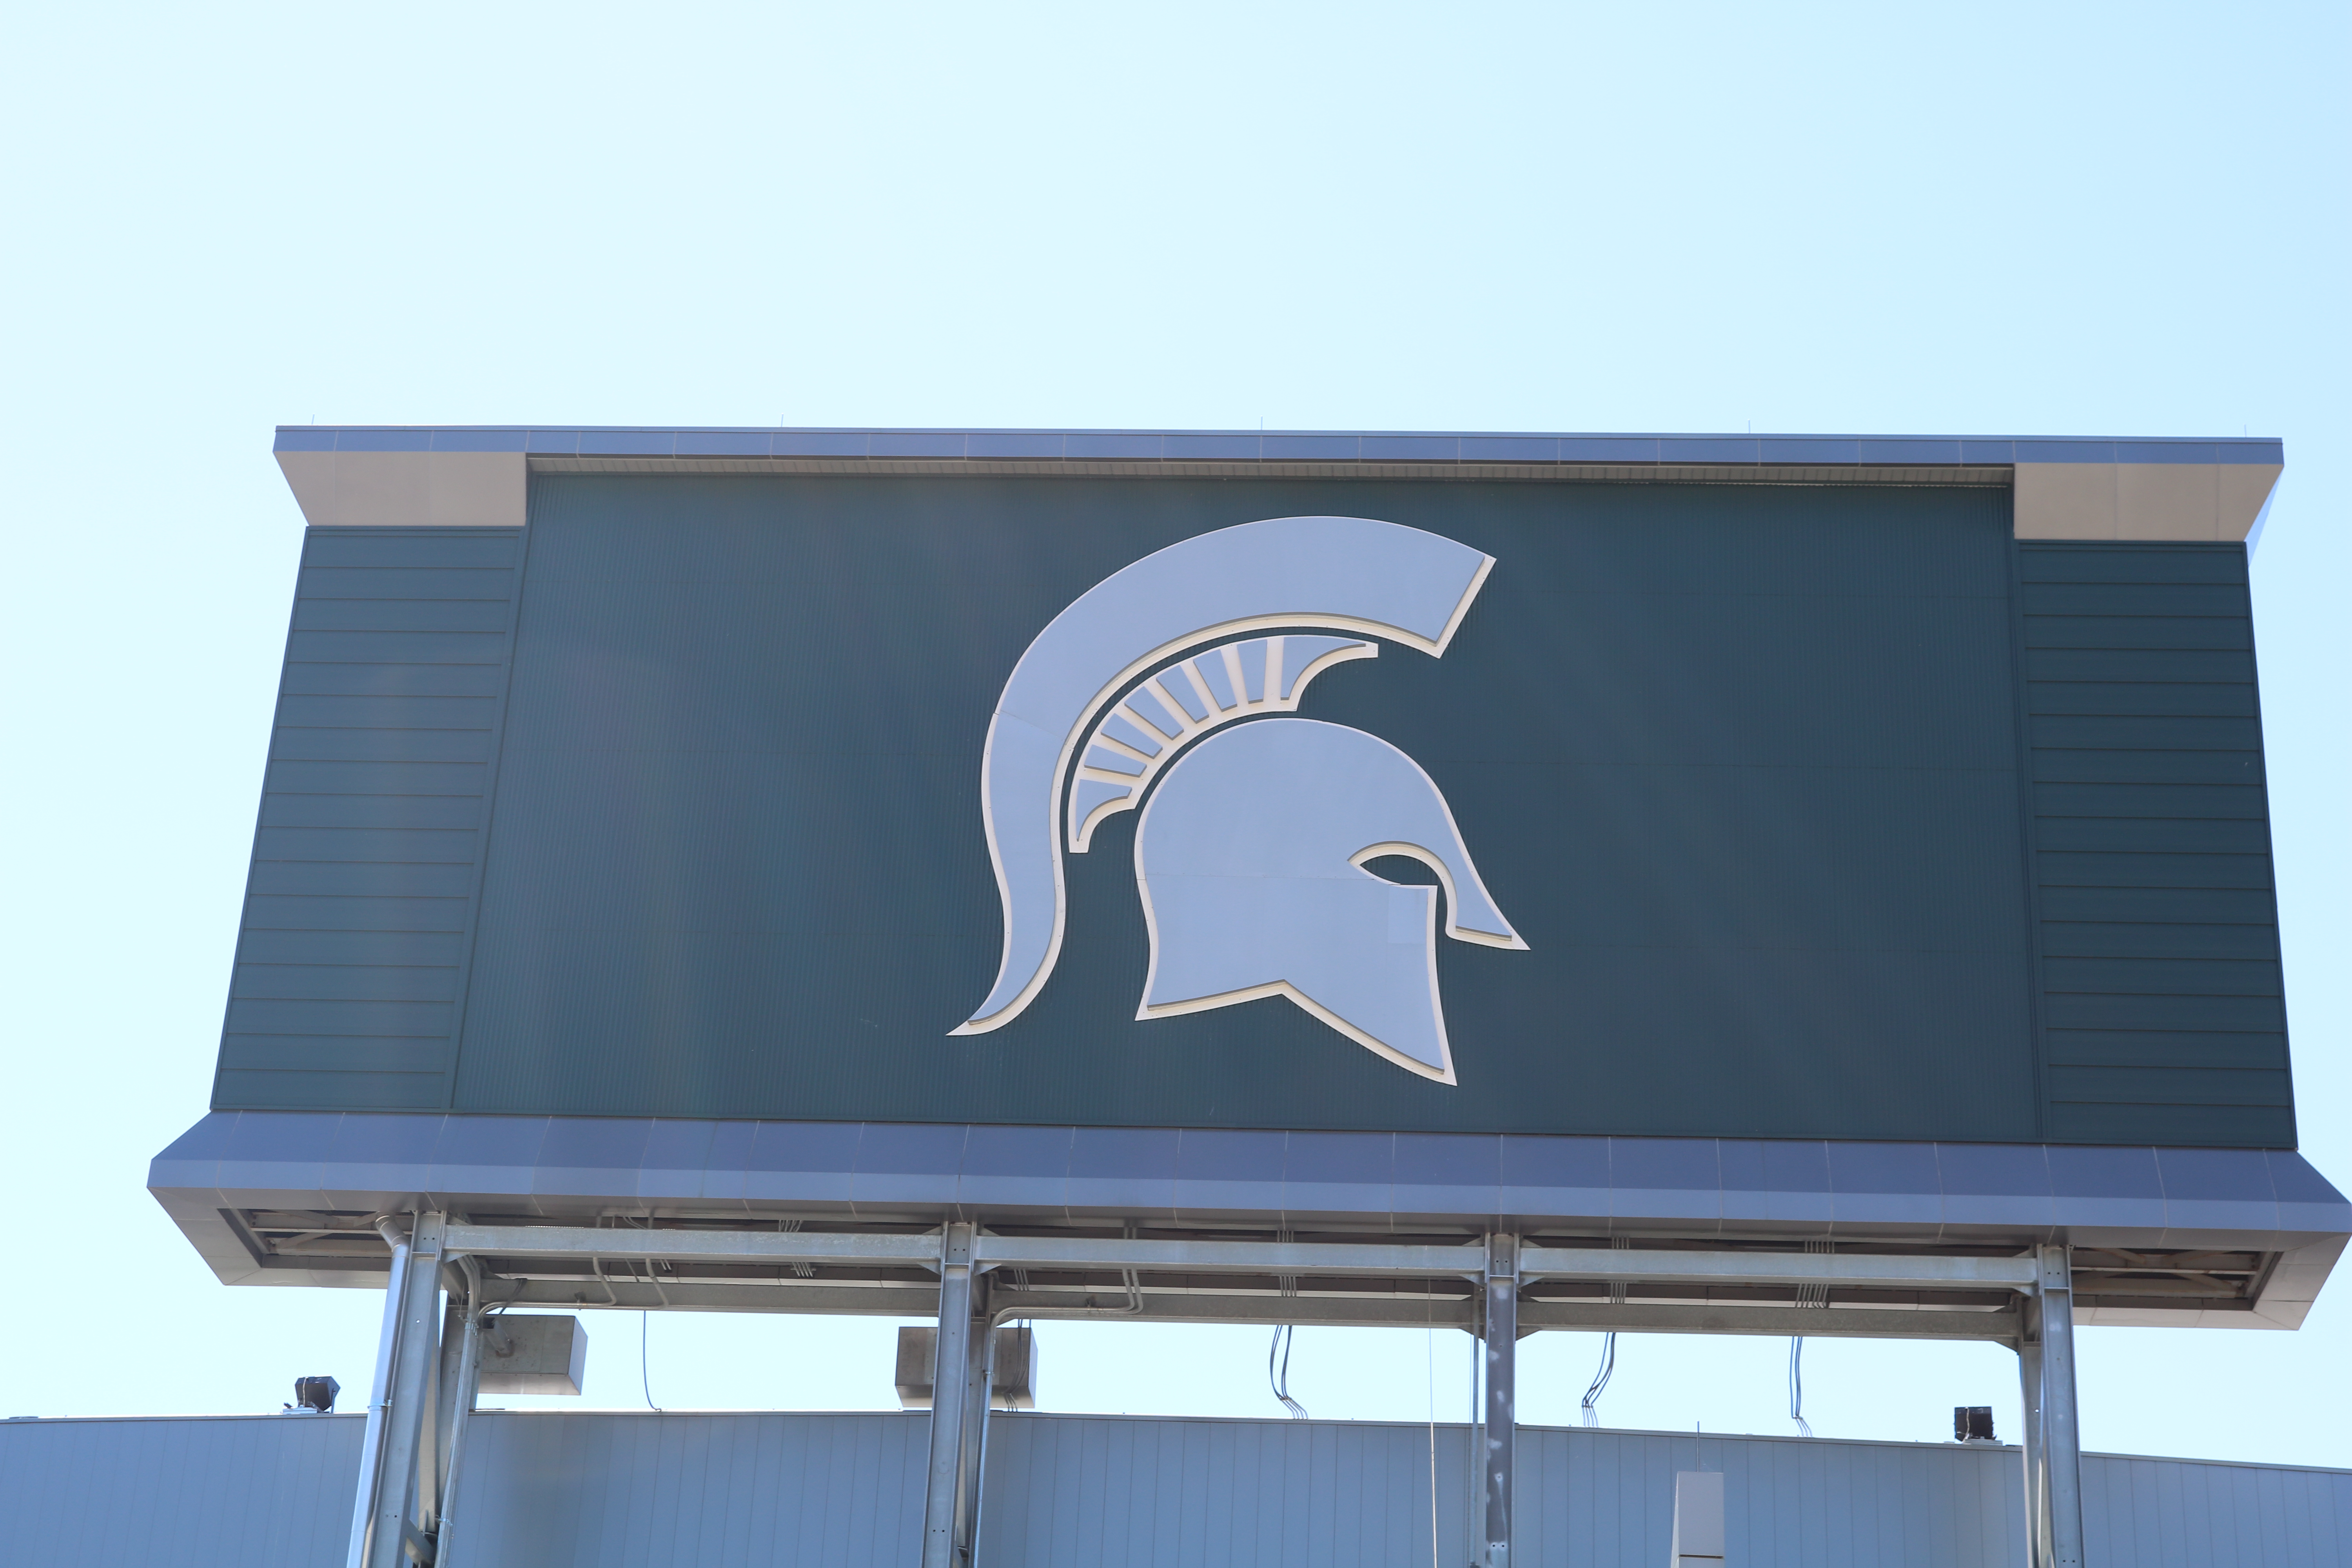 MSU Board of Trustees releases statement after Hitler image on